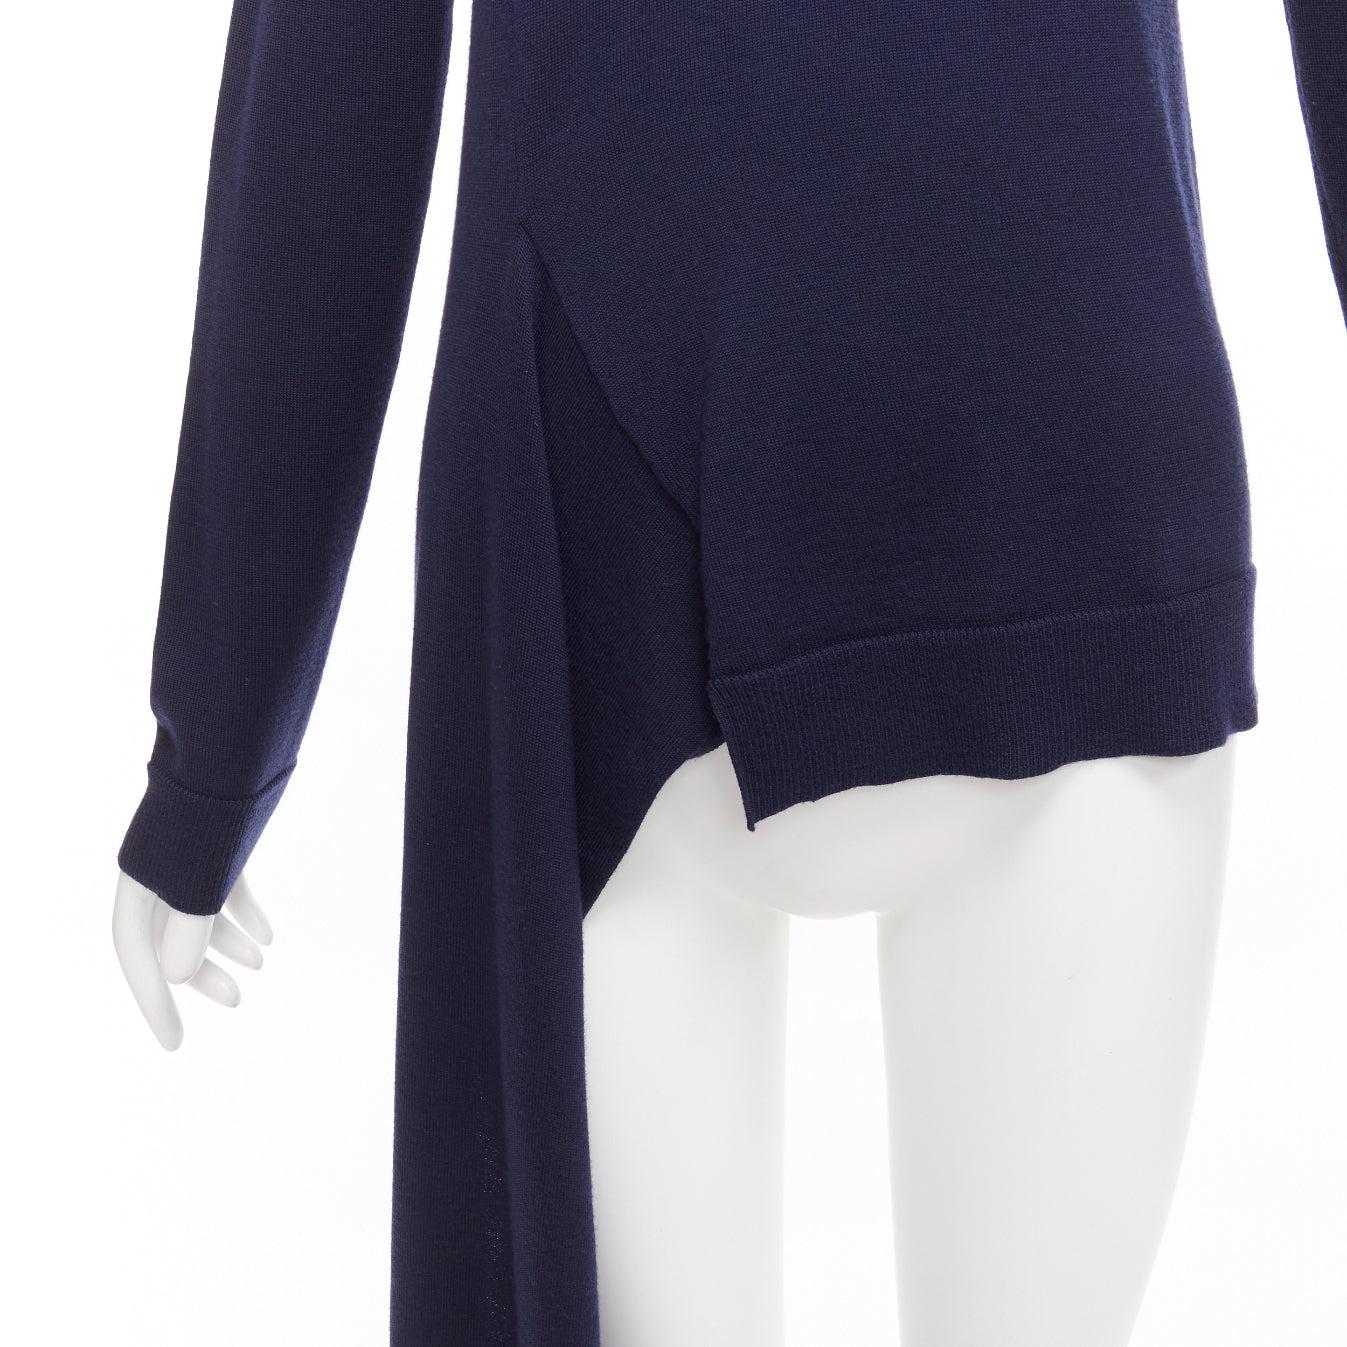 PORTS 1961 navy wool v neck asymmetric hem drape sweater XS
Reference: NKLL/A00154
Brand: Ports 1961
Material: Wool
Color: Navy
Pattern: Solid
Closure: Pullover

CONDITION:
Condition: Fair, this item was pre-owned and is in fair condition. Please